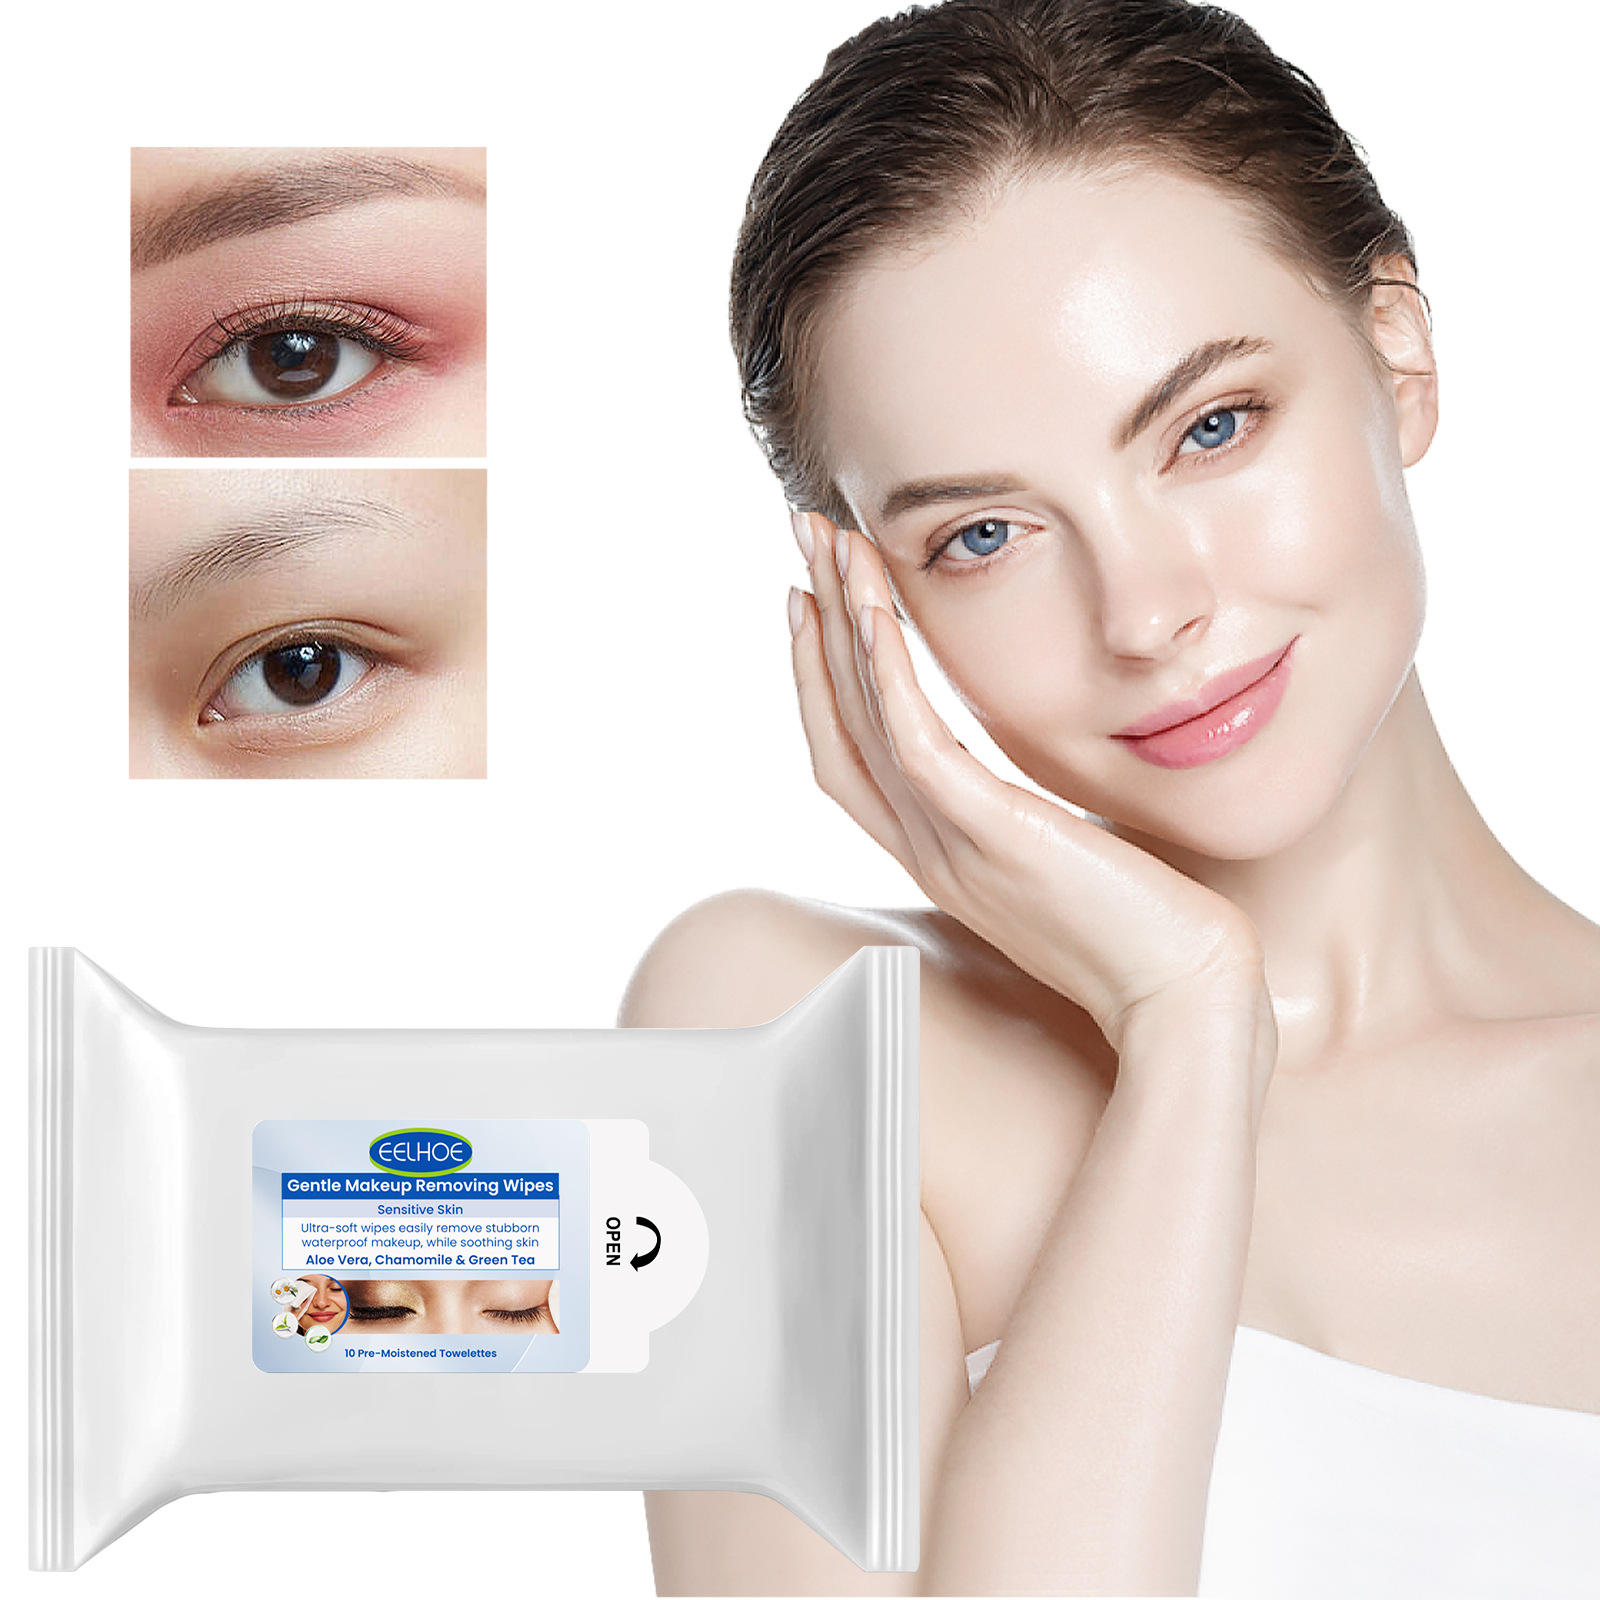 Eelhoe Gentle Neutrogena Cleansing Towelettes Deep Cleansing Facial Eye and Lip Makeup Gentle Refreshing Non-Irritating Make-up Removing Tissue